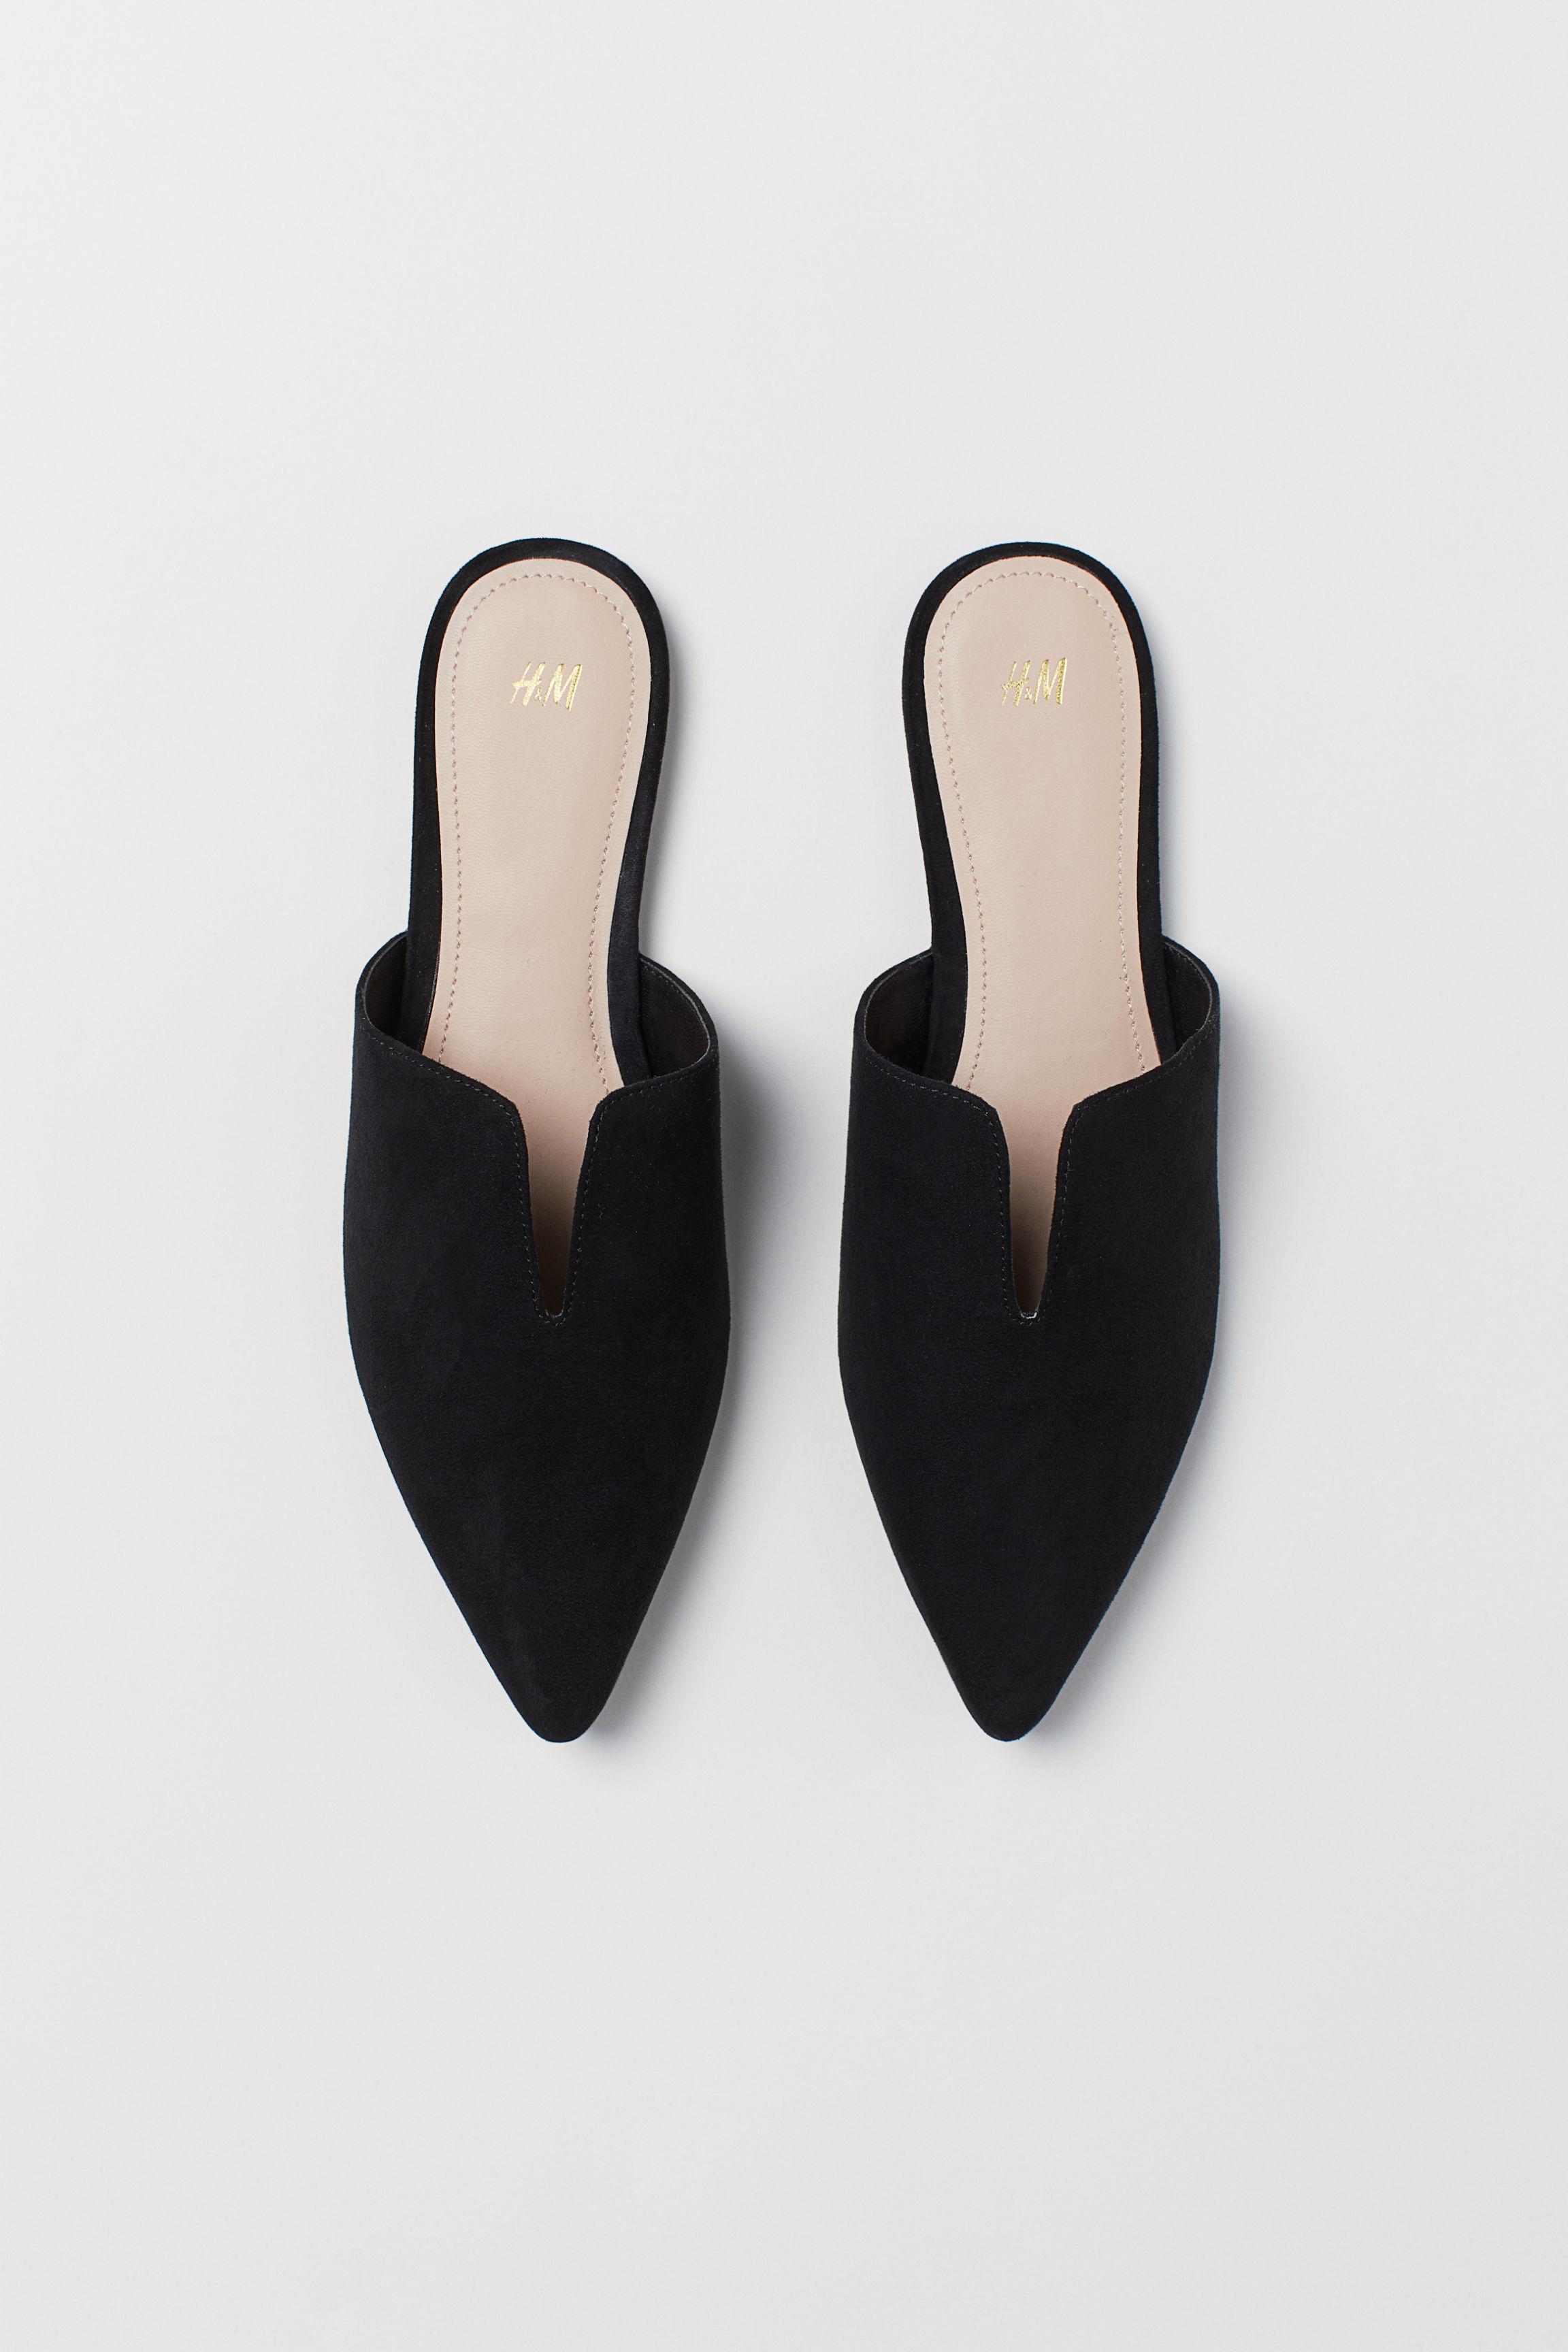 H&M Pointed Mules in Black | Lyst